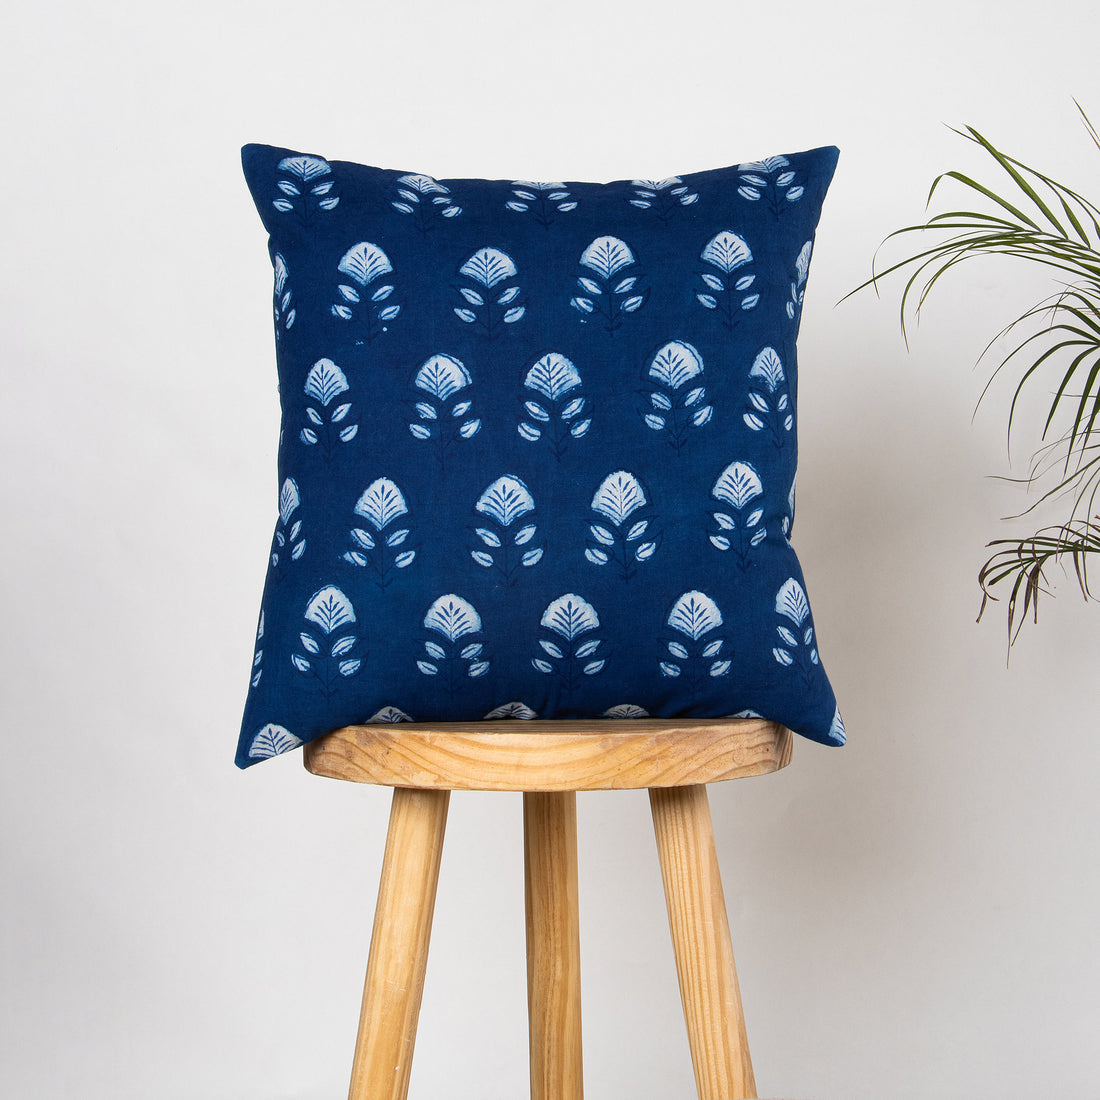 Luxury Cushion Covers Hand Block Indigo Floral Printed Cotton Online